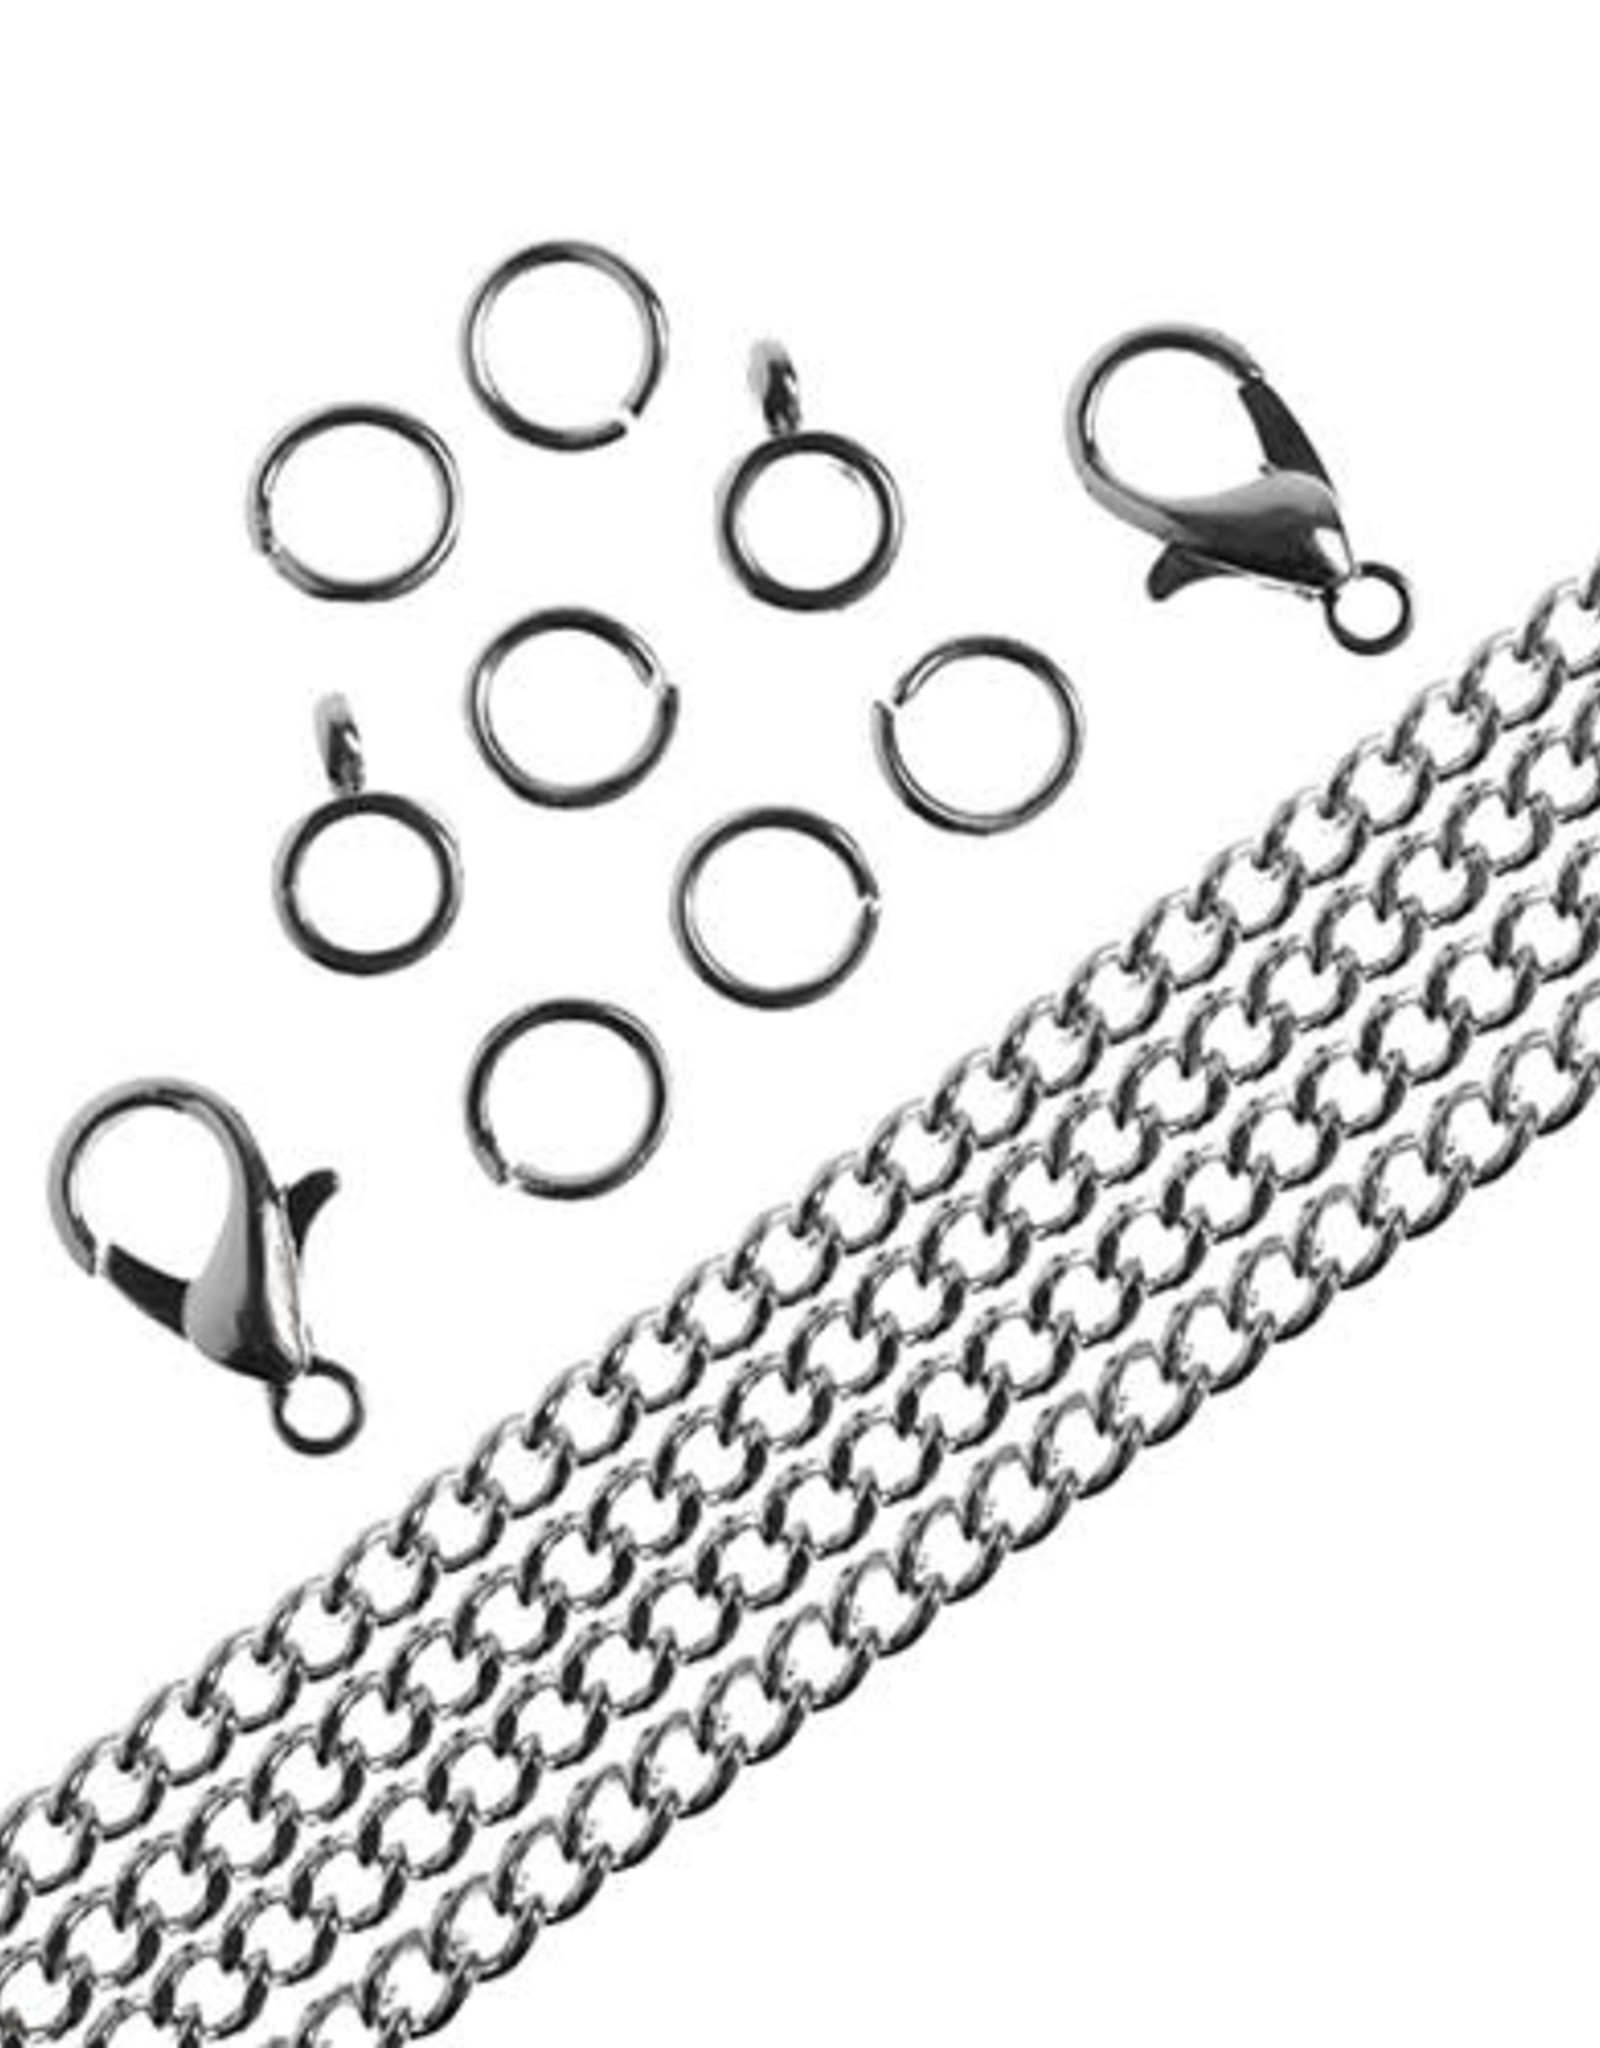 Craft Supplies 36in Chain and Findings Set- 3mm Curb Chain Includes Clasp/ Jump Rings/ Bails in Silver